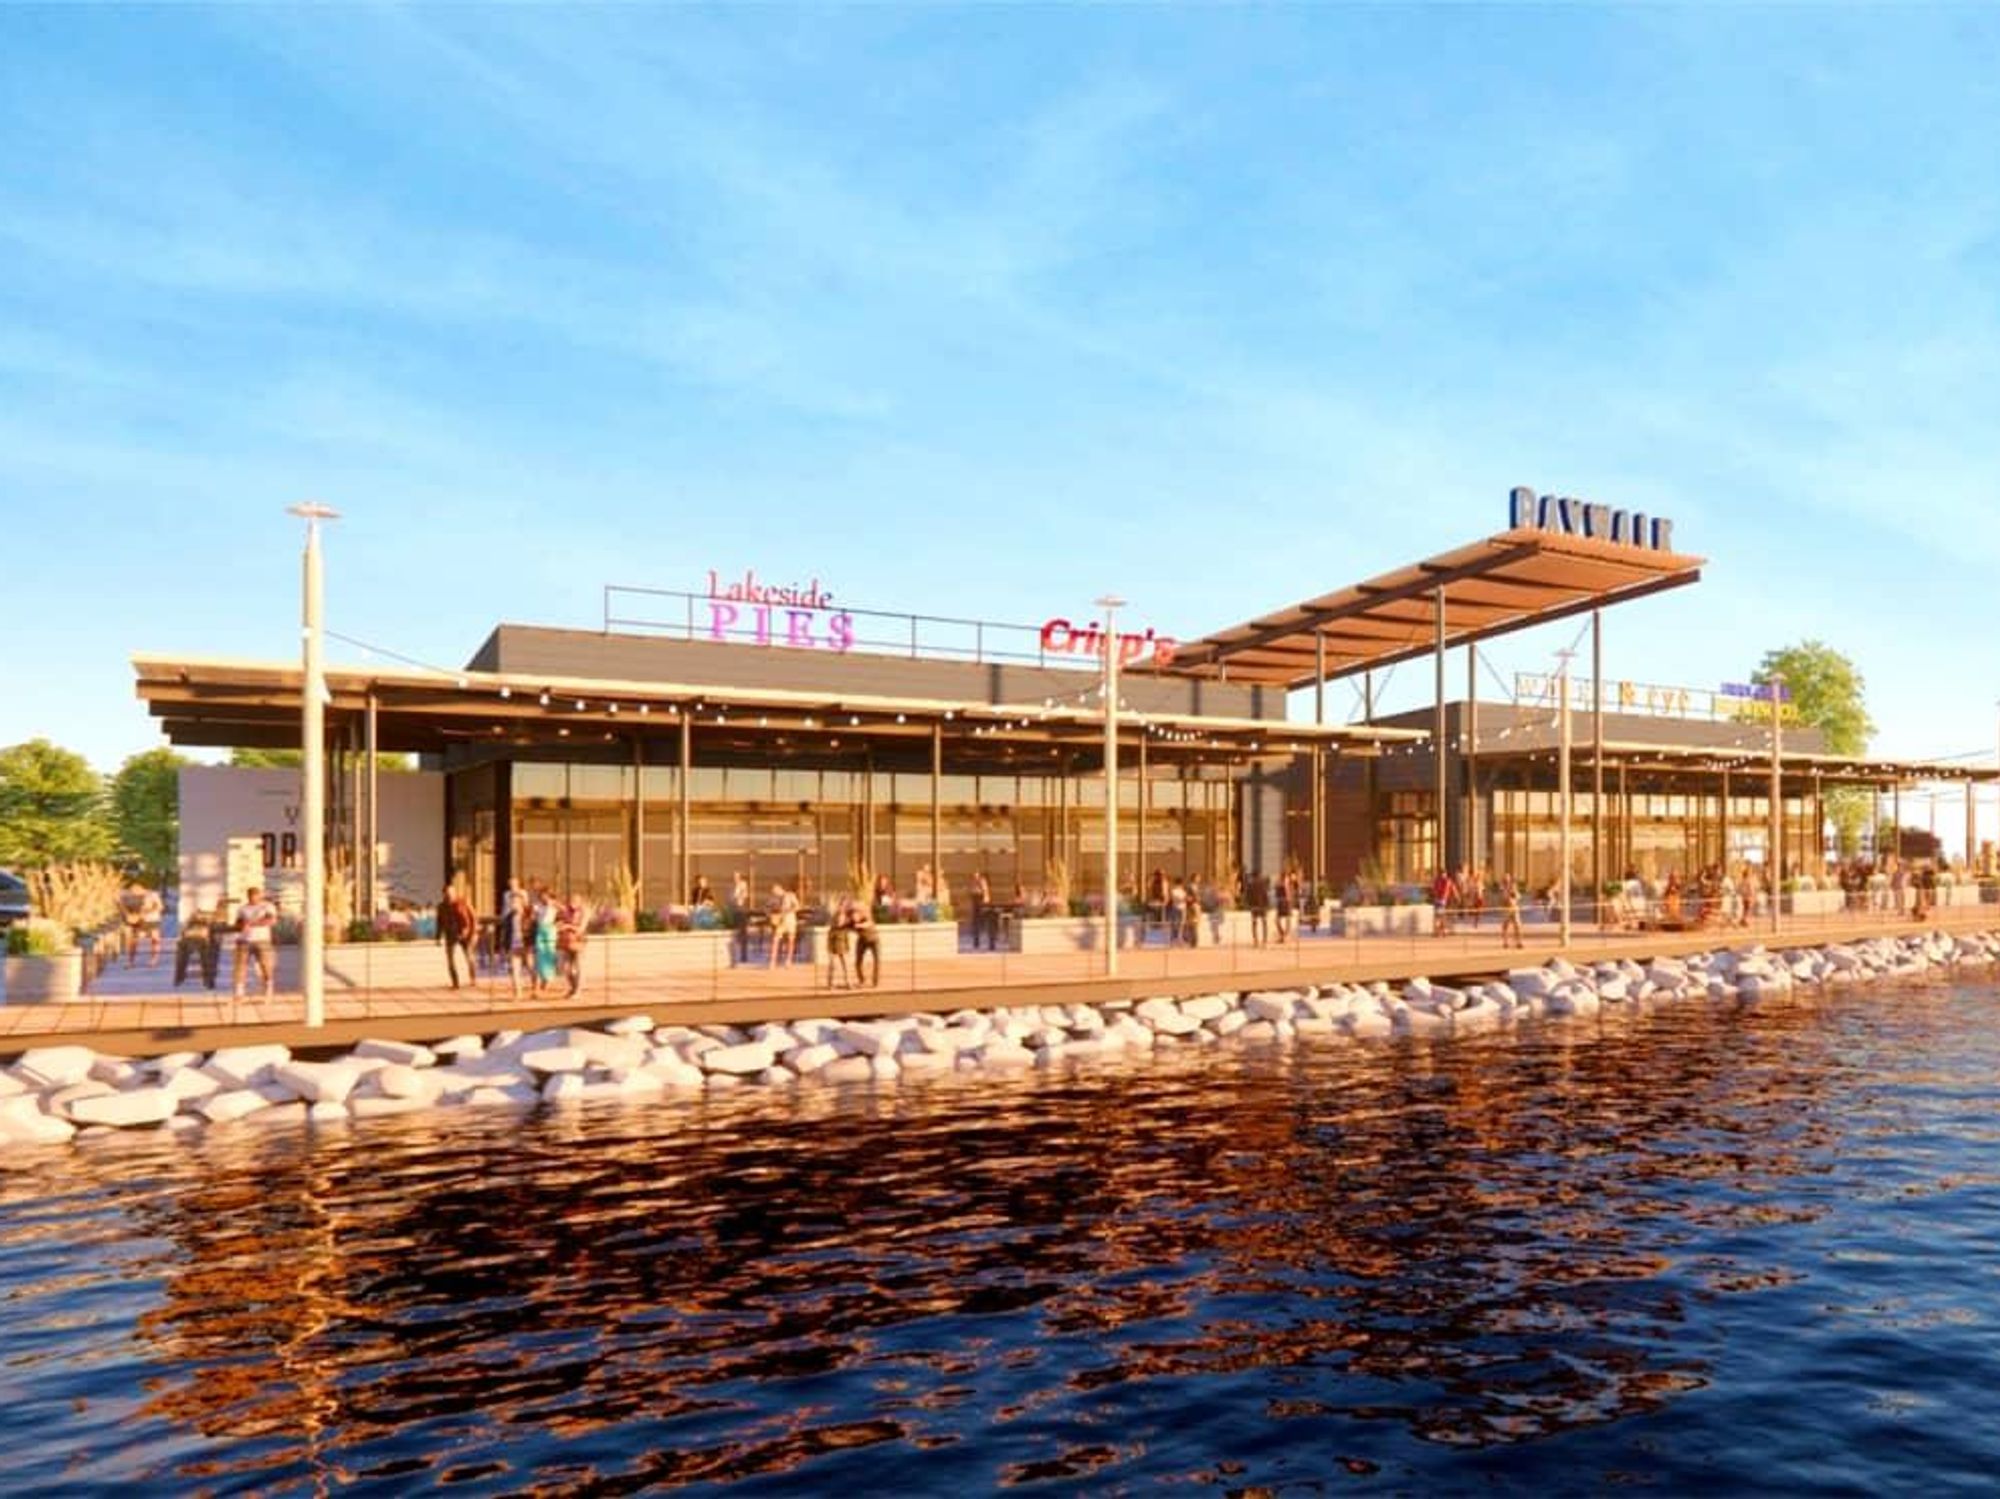 New restaurant park on the waterfront joins lakeside marina in